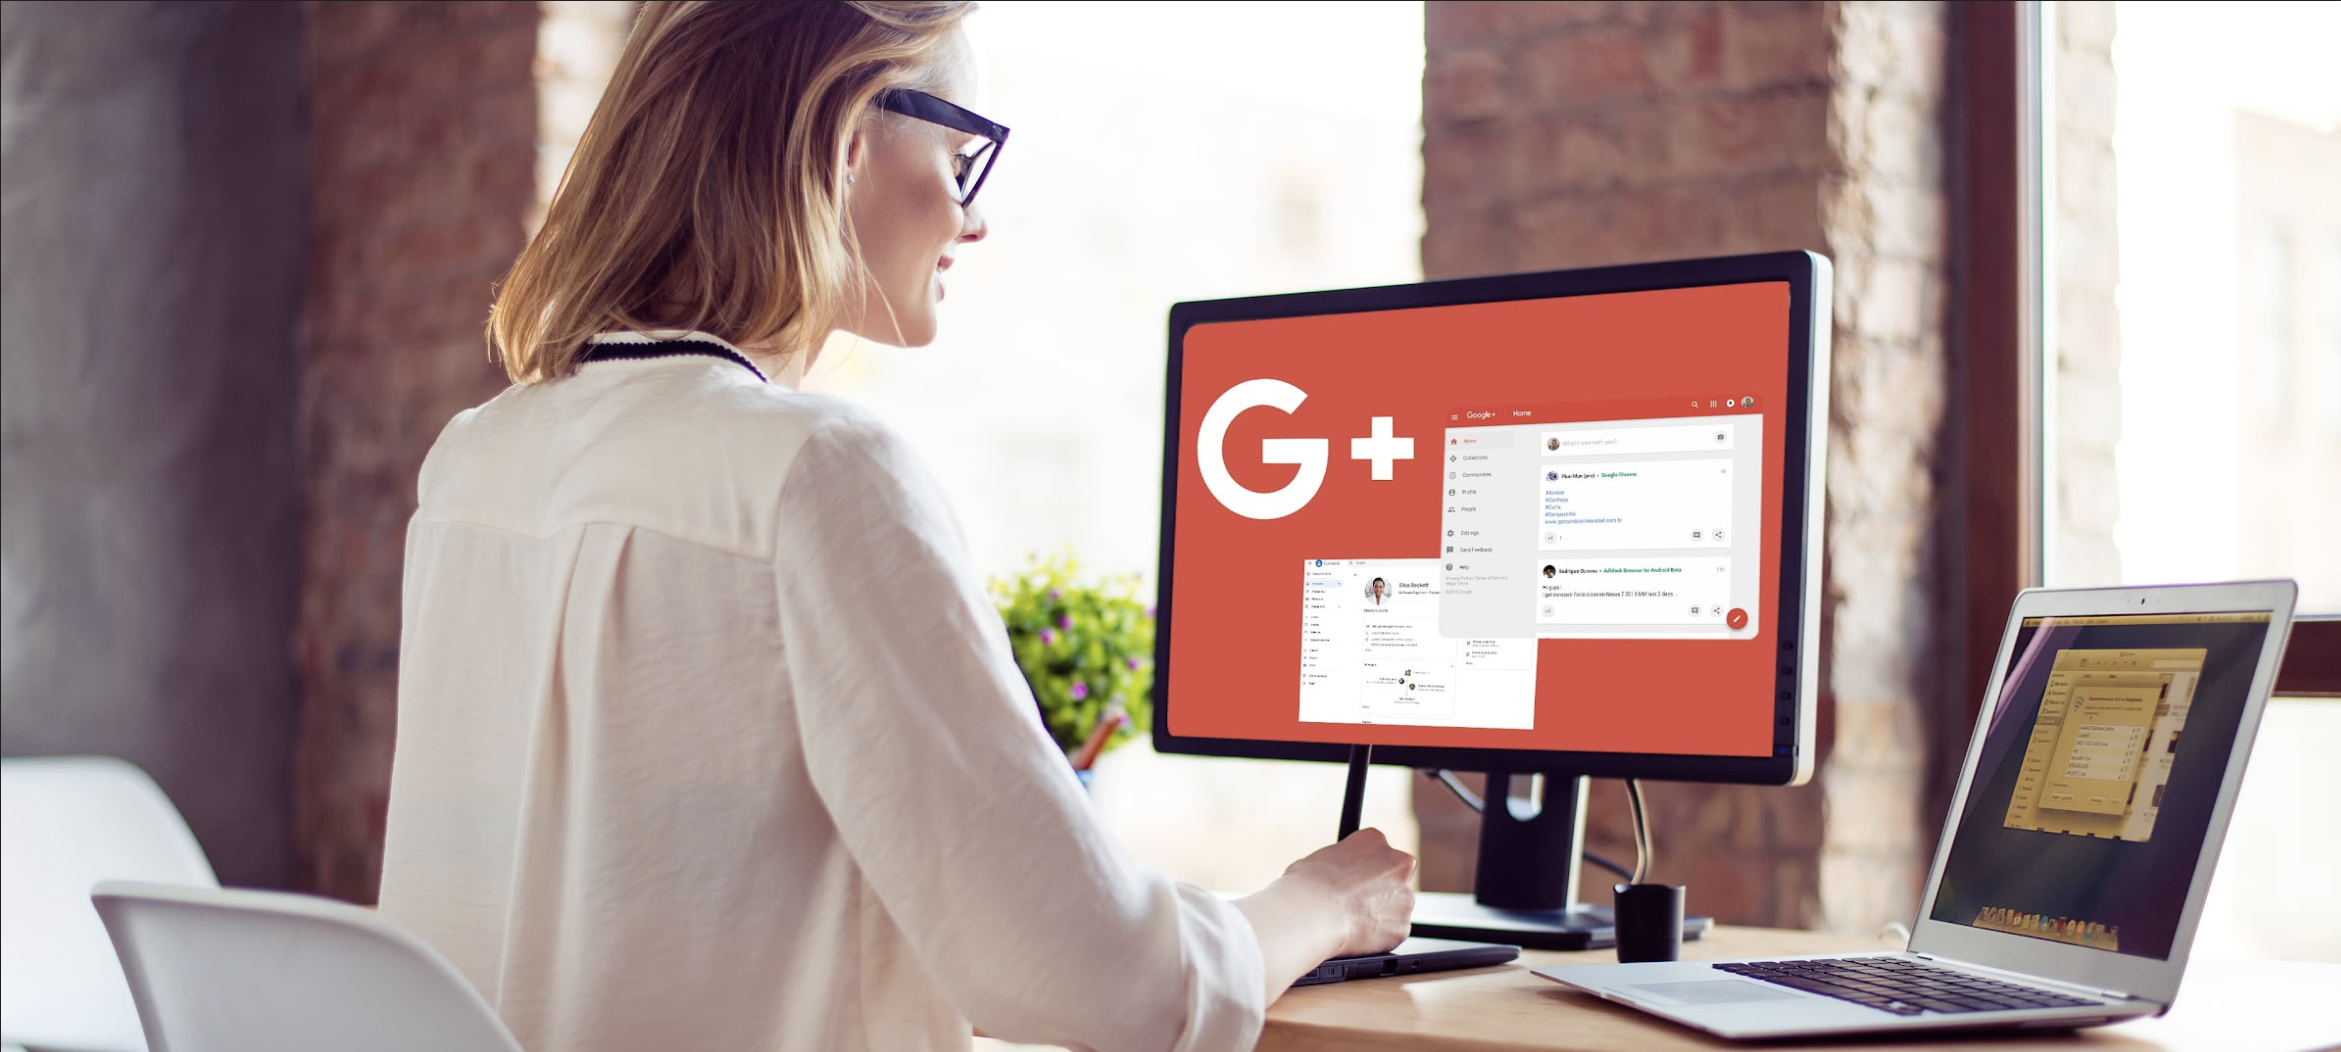 Google+: 5 Insider Tips to Use When Recruiting Online